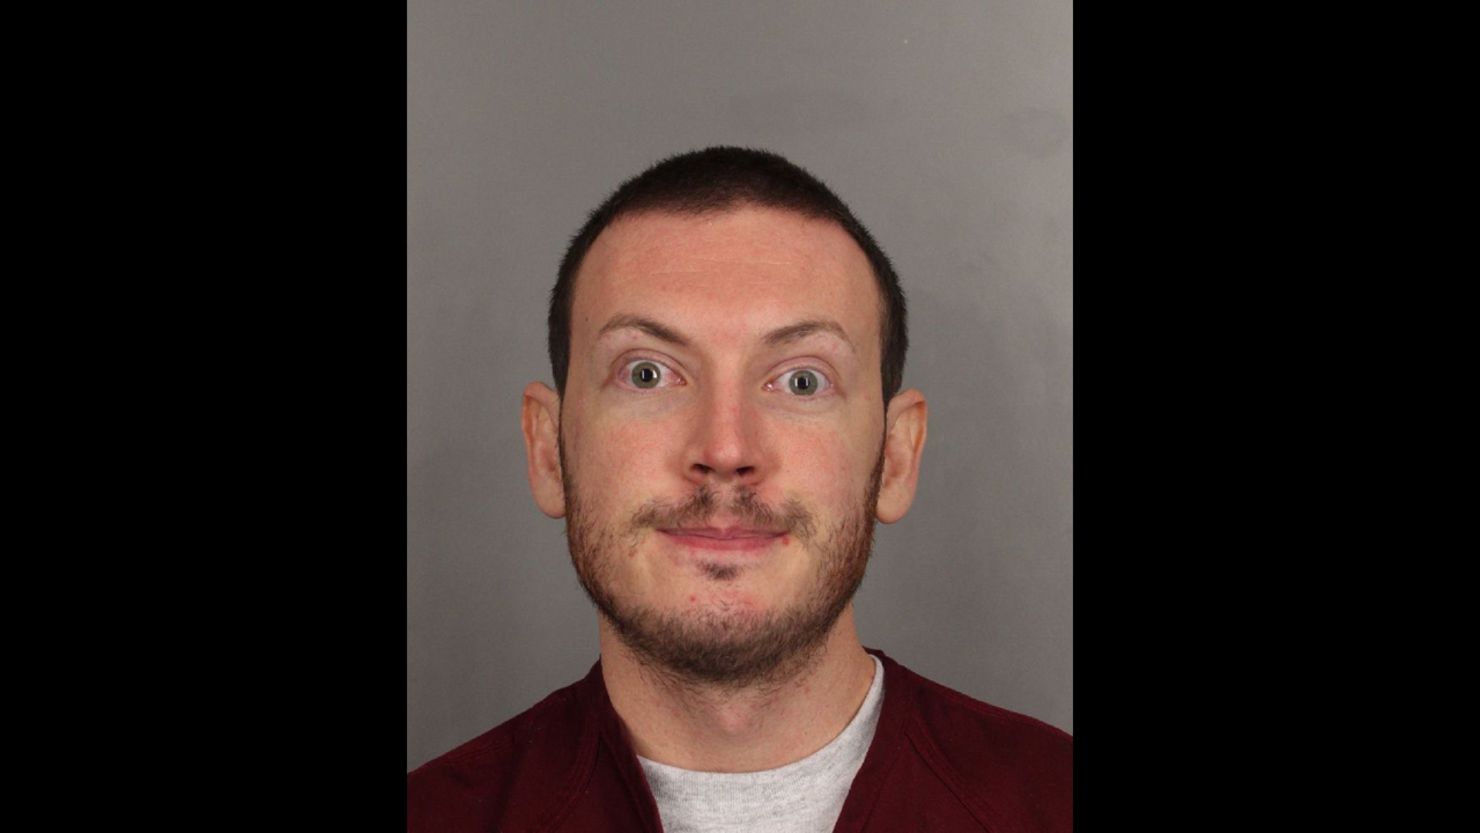 The University of Colorado at Denver released more than 3,800 e-mails that were sent or received by James Holmes or mentioned his name in the text.